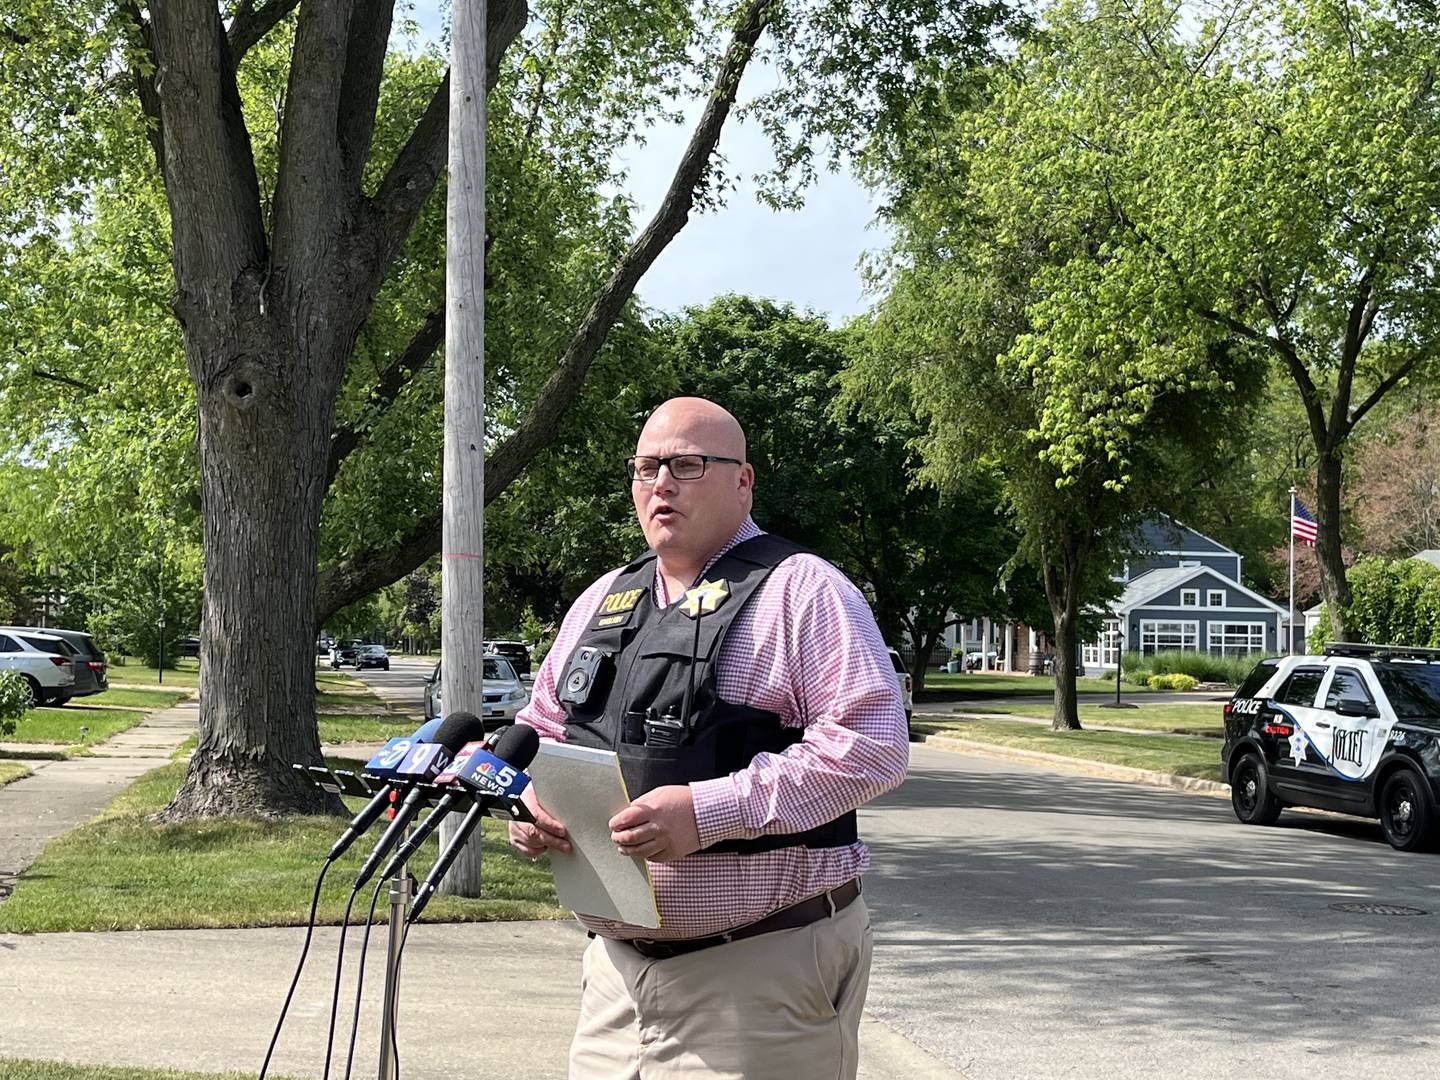 Joliet police Sgt. Dwayne English providing information about the pursuit of burglary suspects to the media on Tuesday, May 30, 2023.